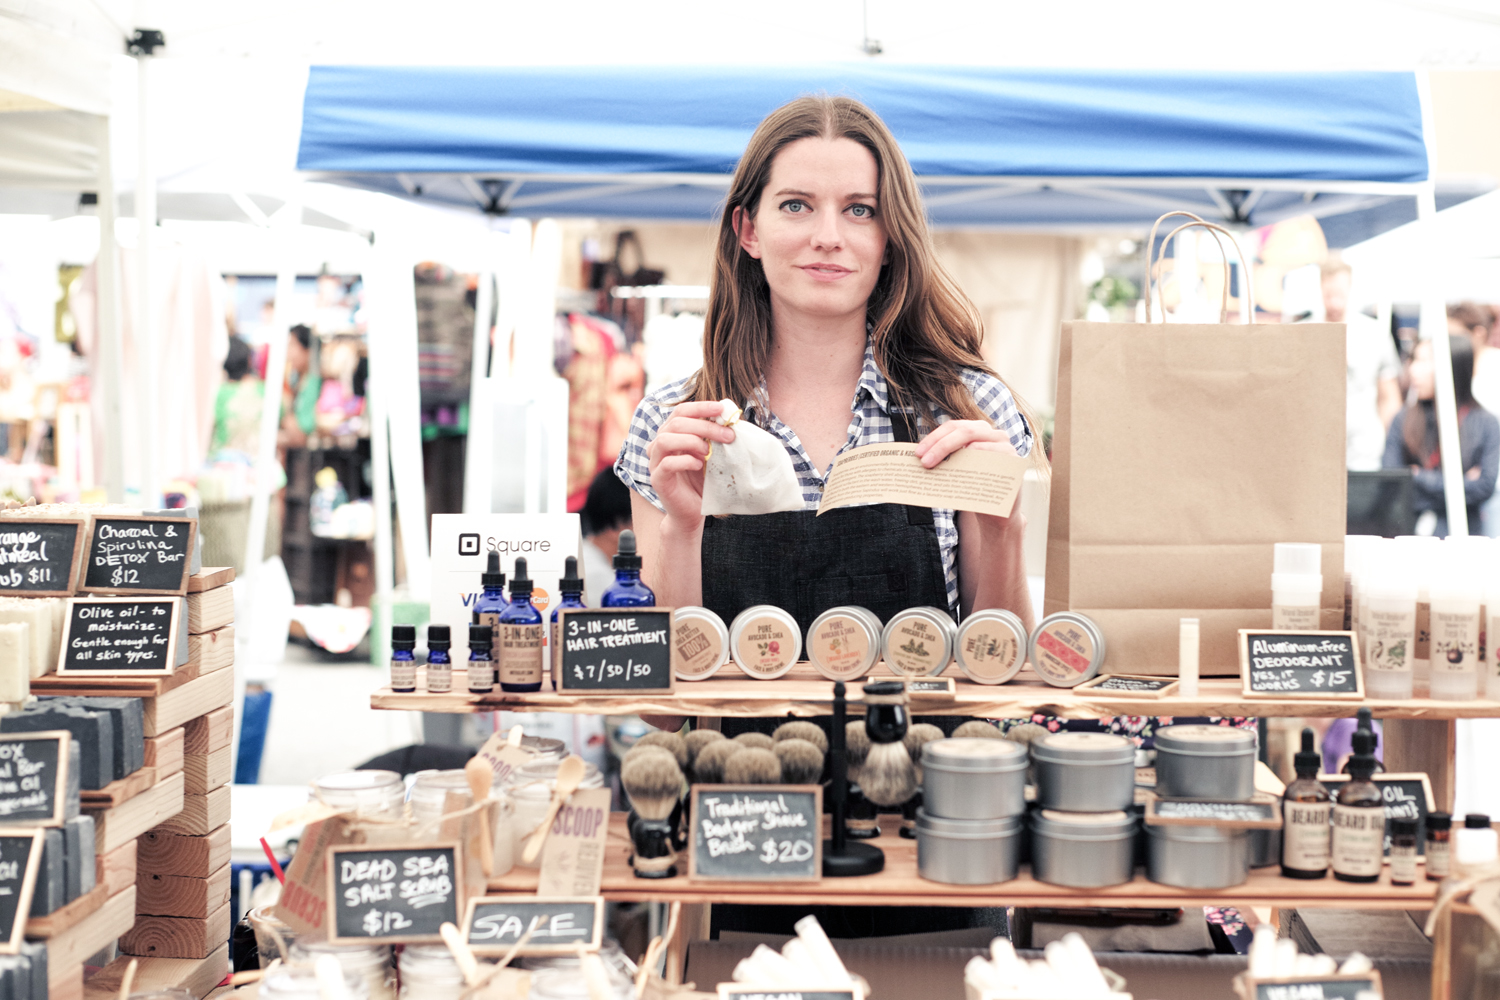 A photo of Callie selling homemade zero waste products at a farmers market